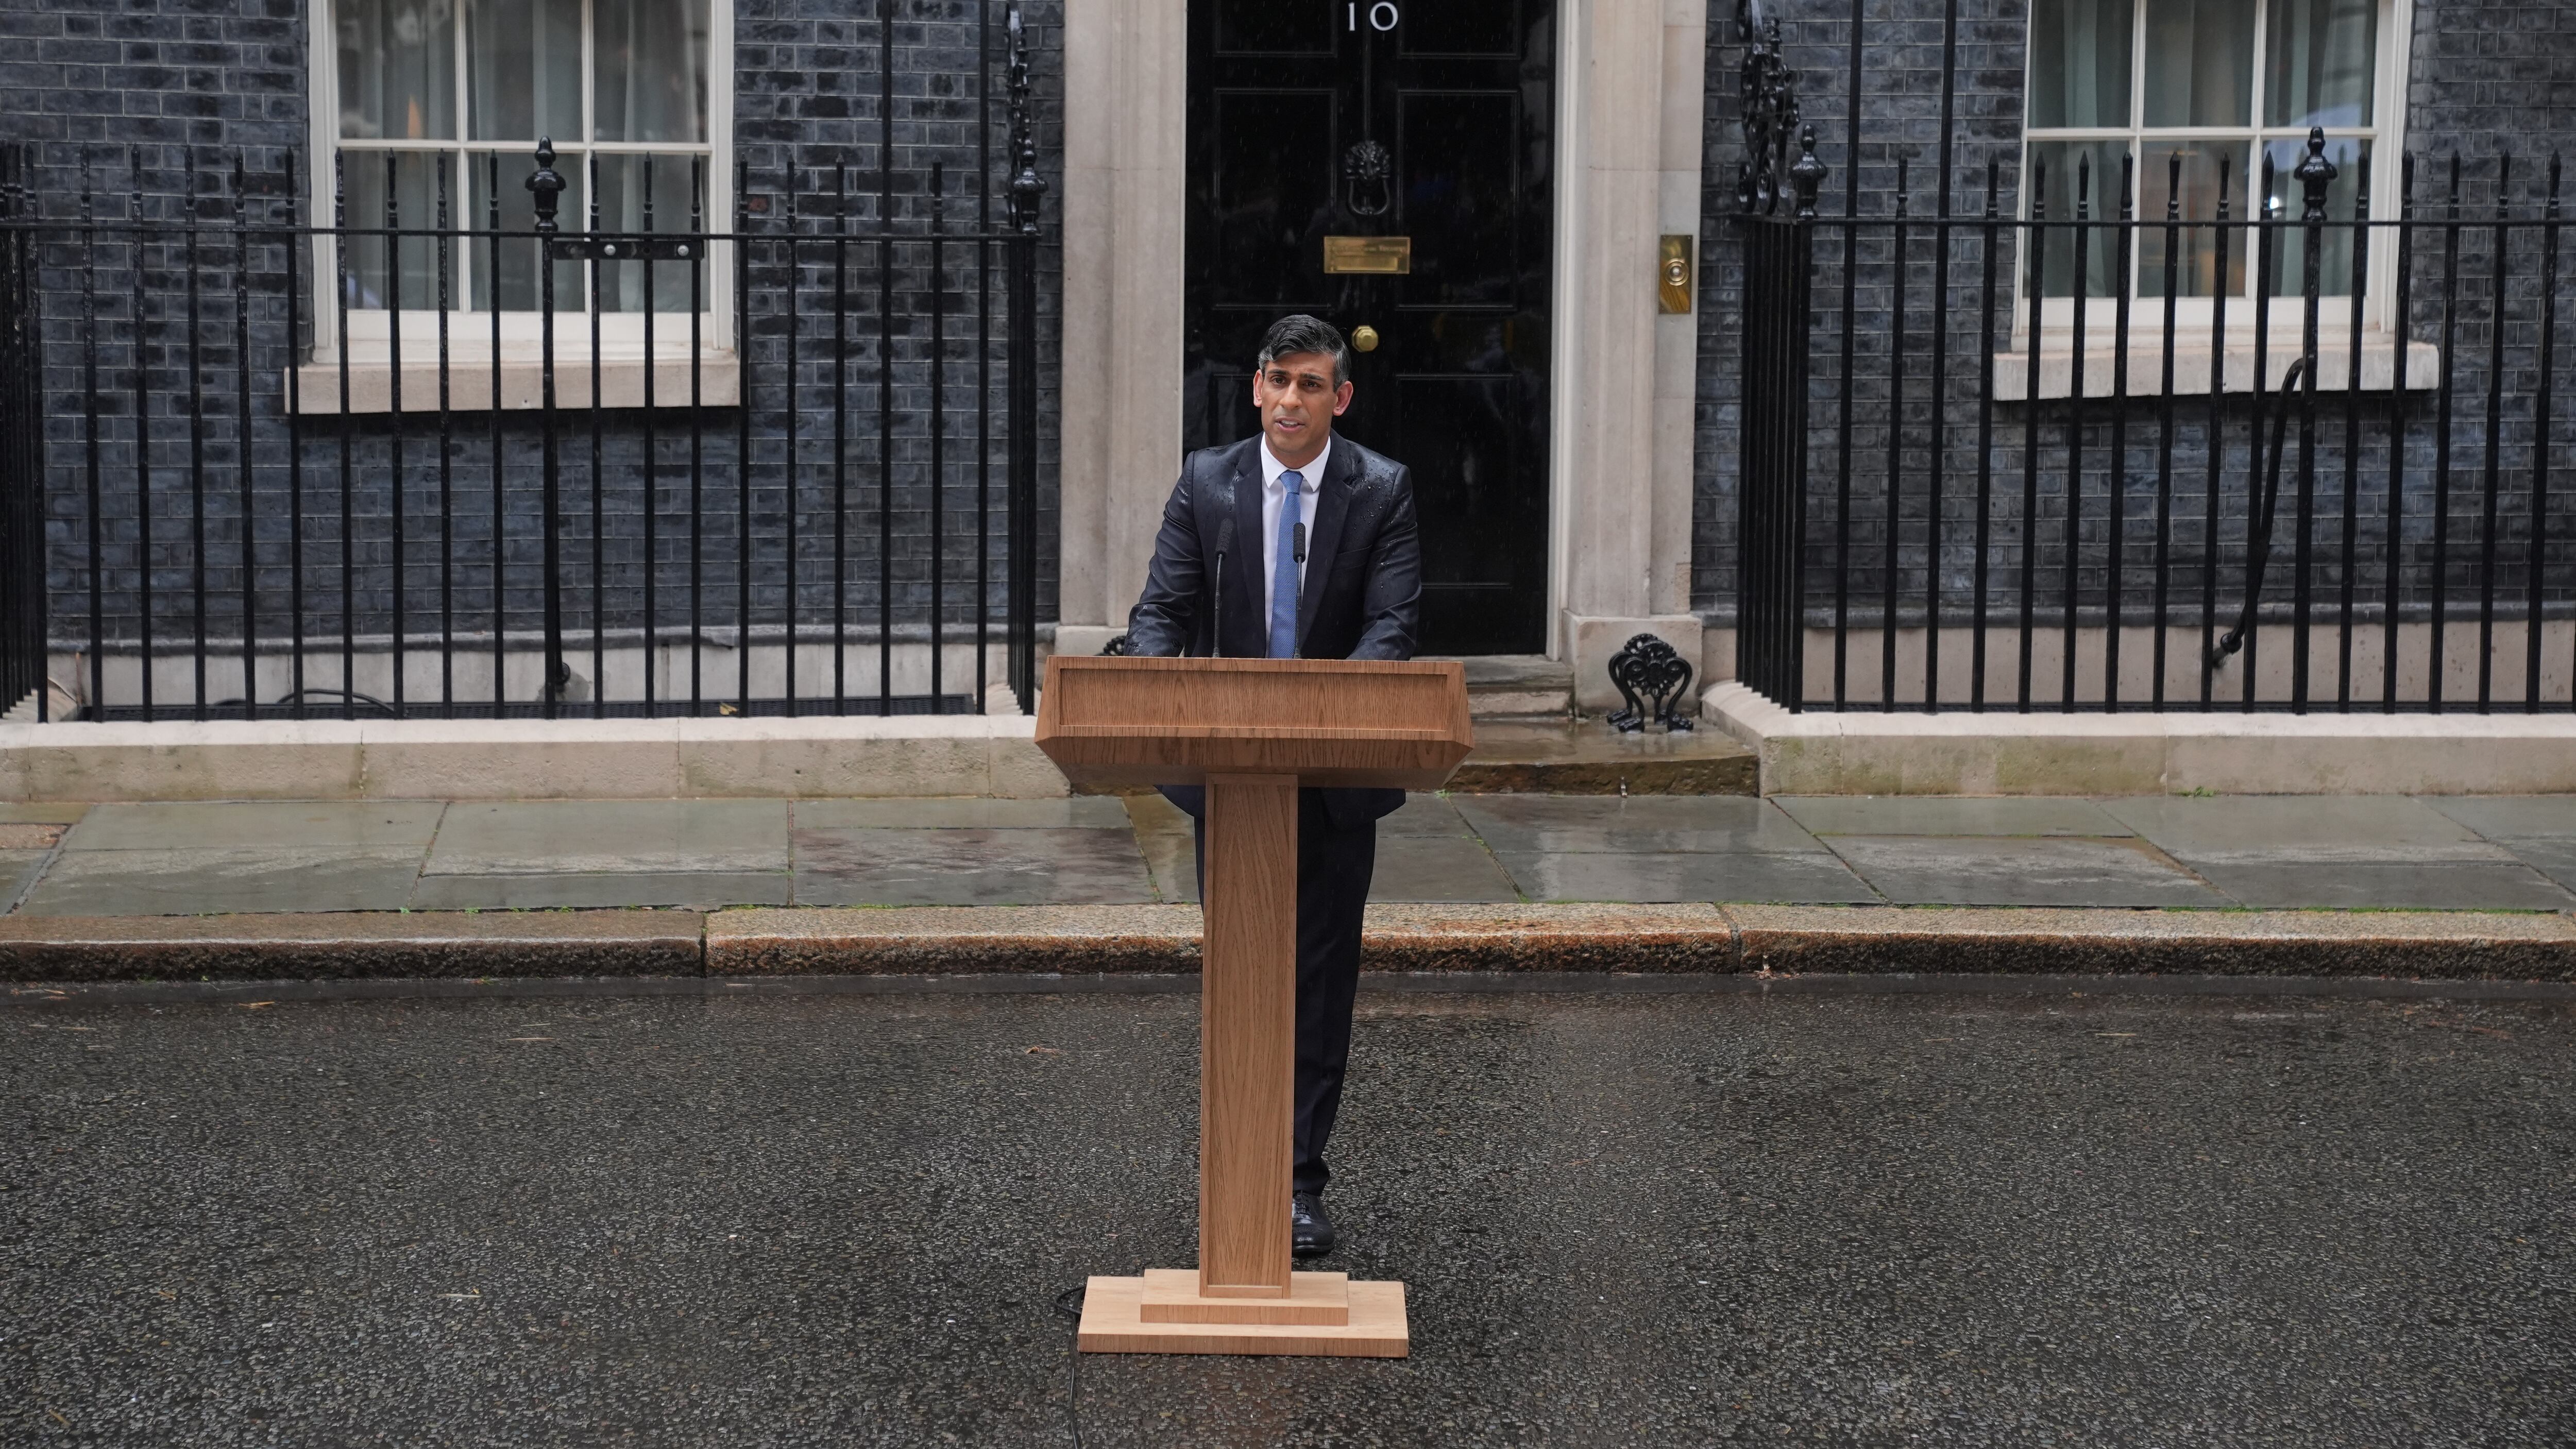 Prime Minister Rishi Sunak issues a statement outside 10 Downing Street, London, after calling a General Election for July 4